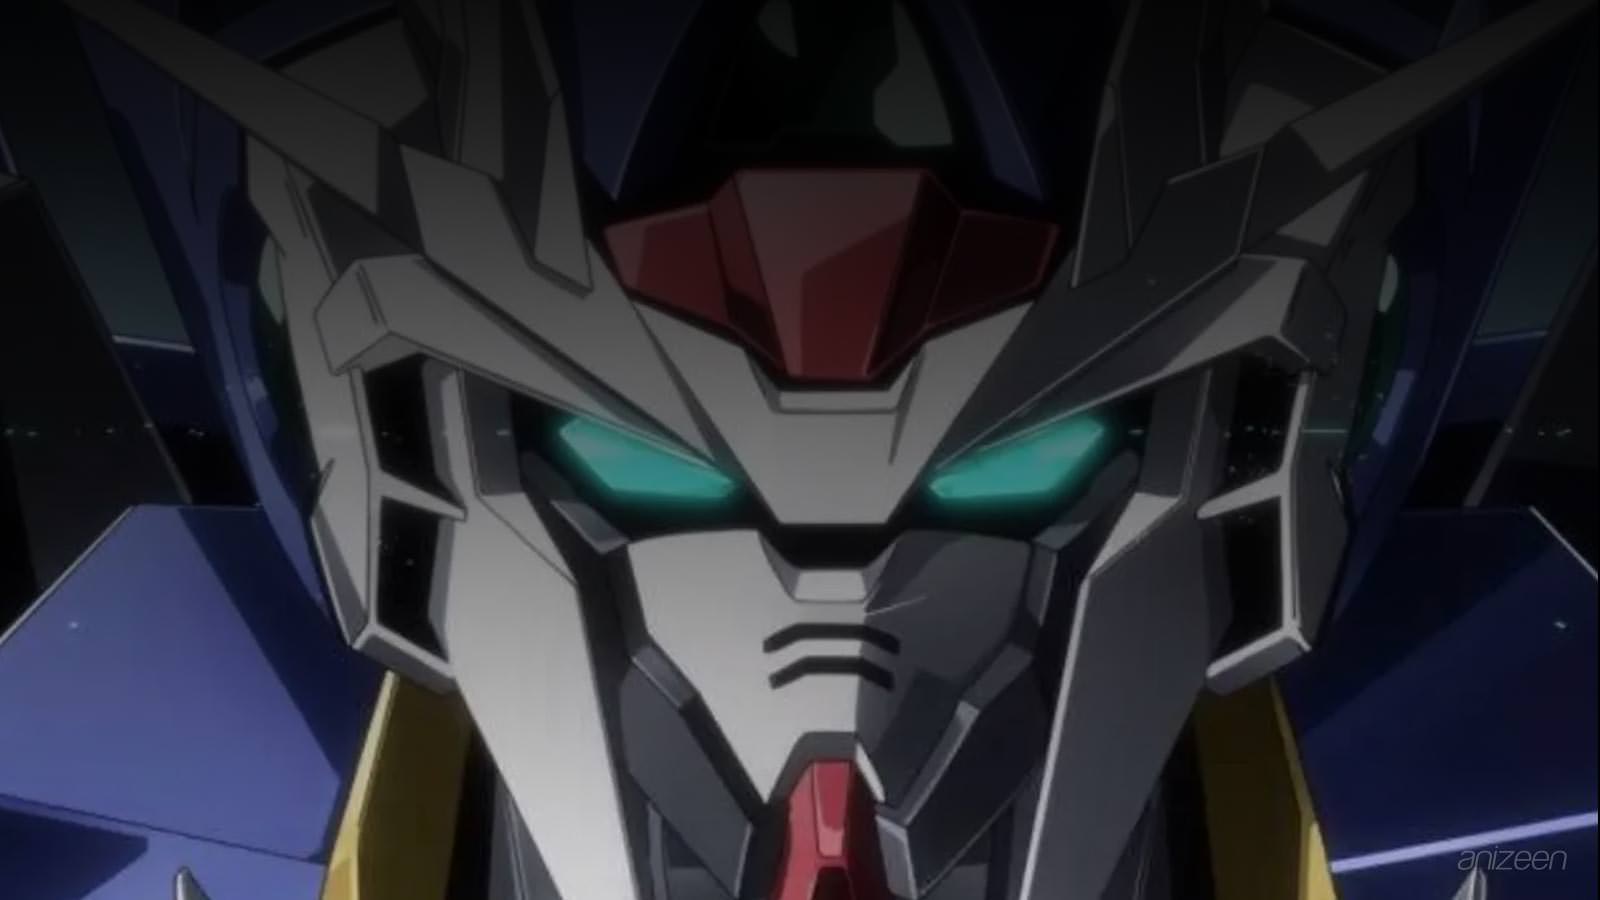 Which Gundam Series has the most impact